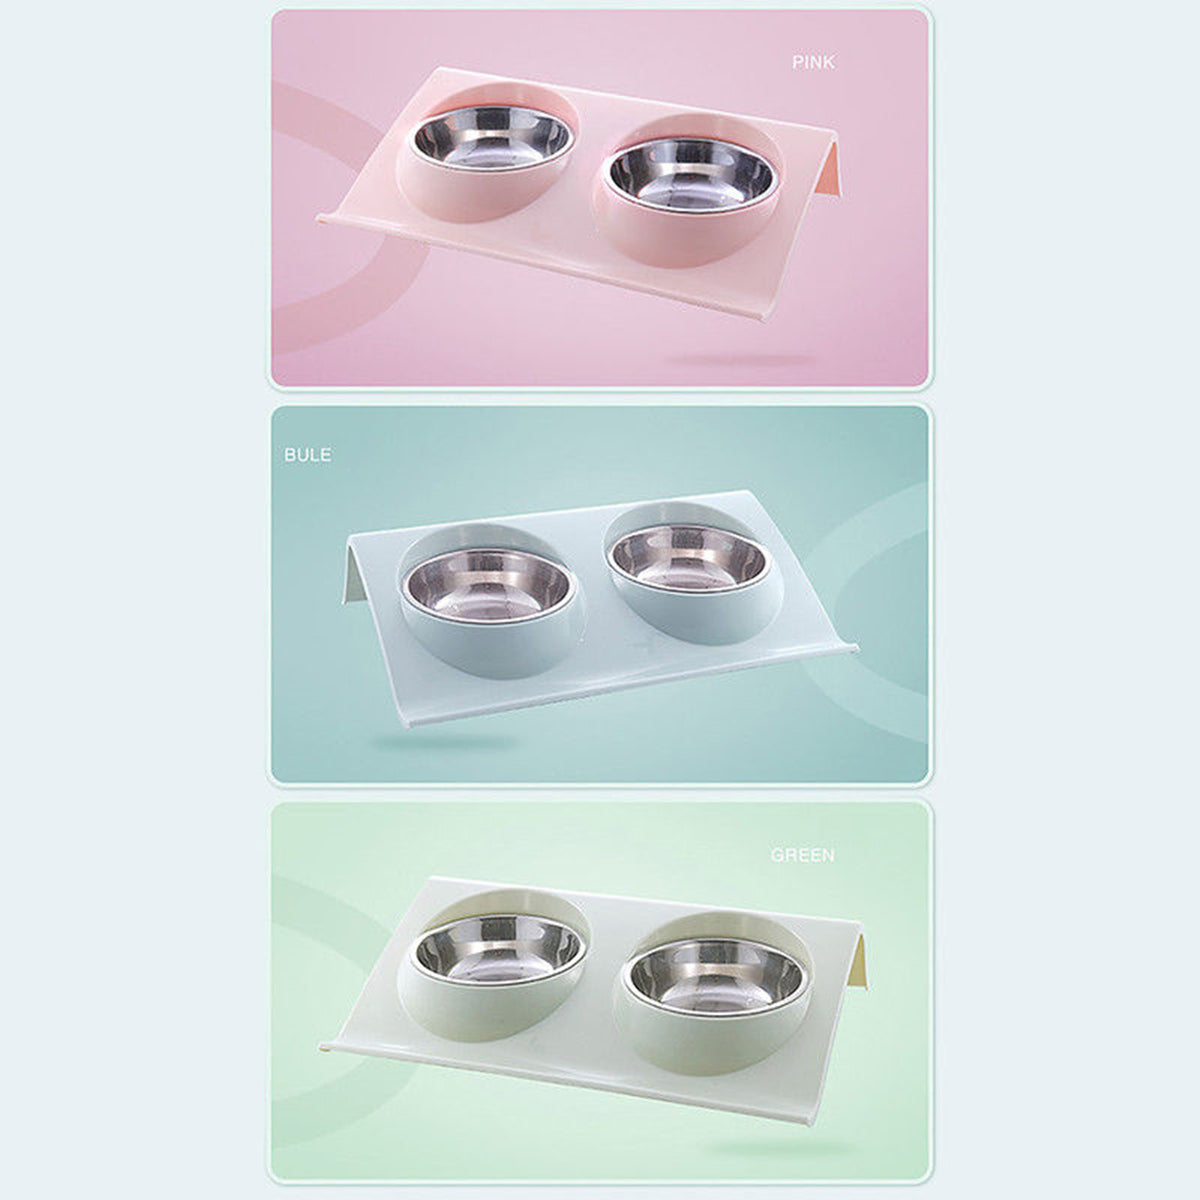 Dog Food Double Bowl Pet Products Stainless Steel Pet Bowl Pet Feeding Tool Tableware Cat Dog Puppy Travel Feeding Feeder - TRIPLE AAA Fashion Collection